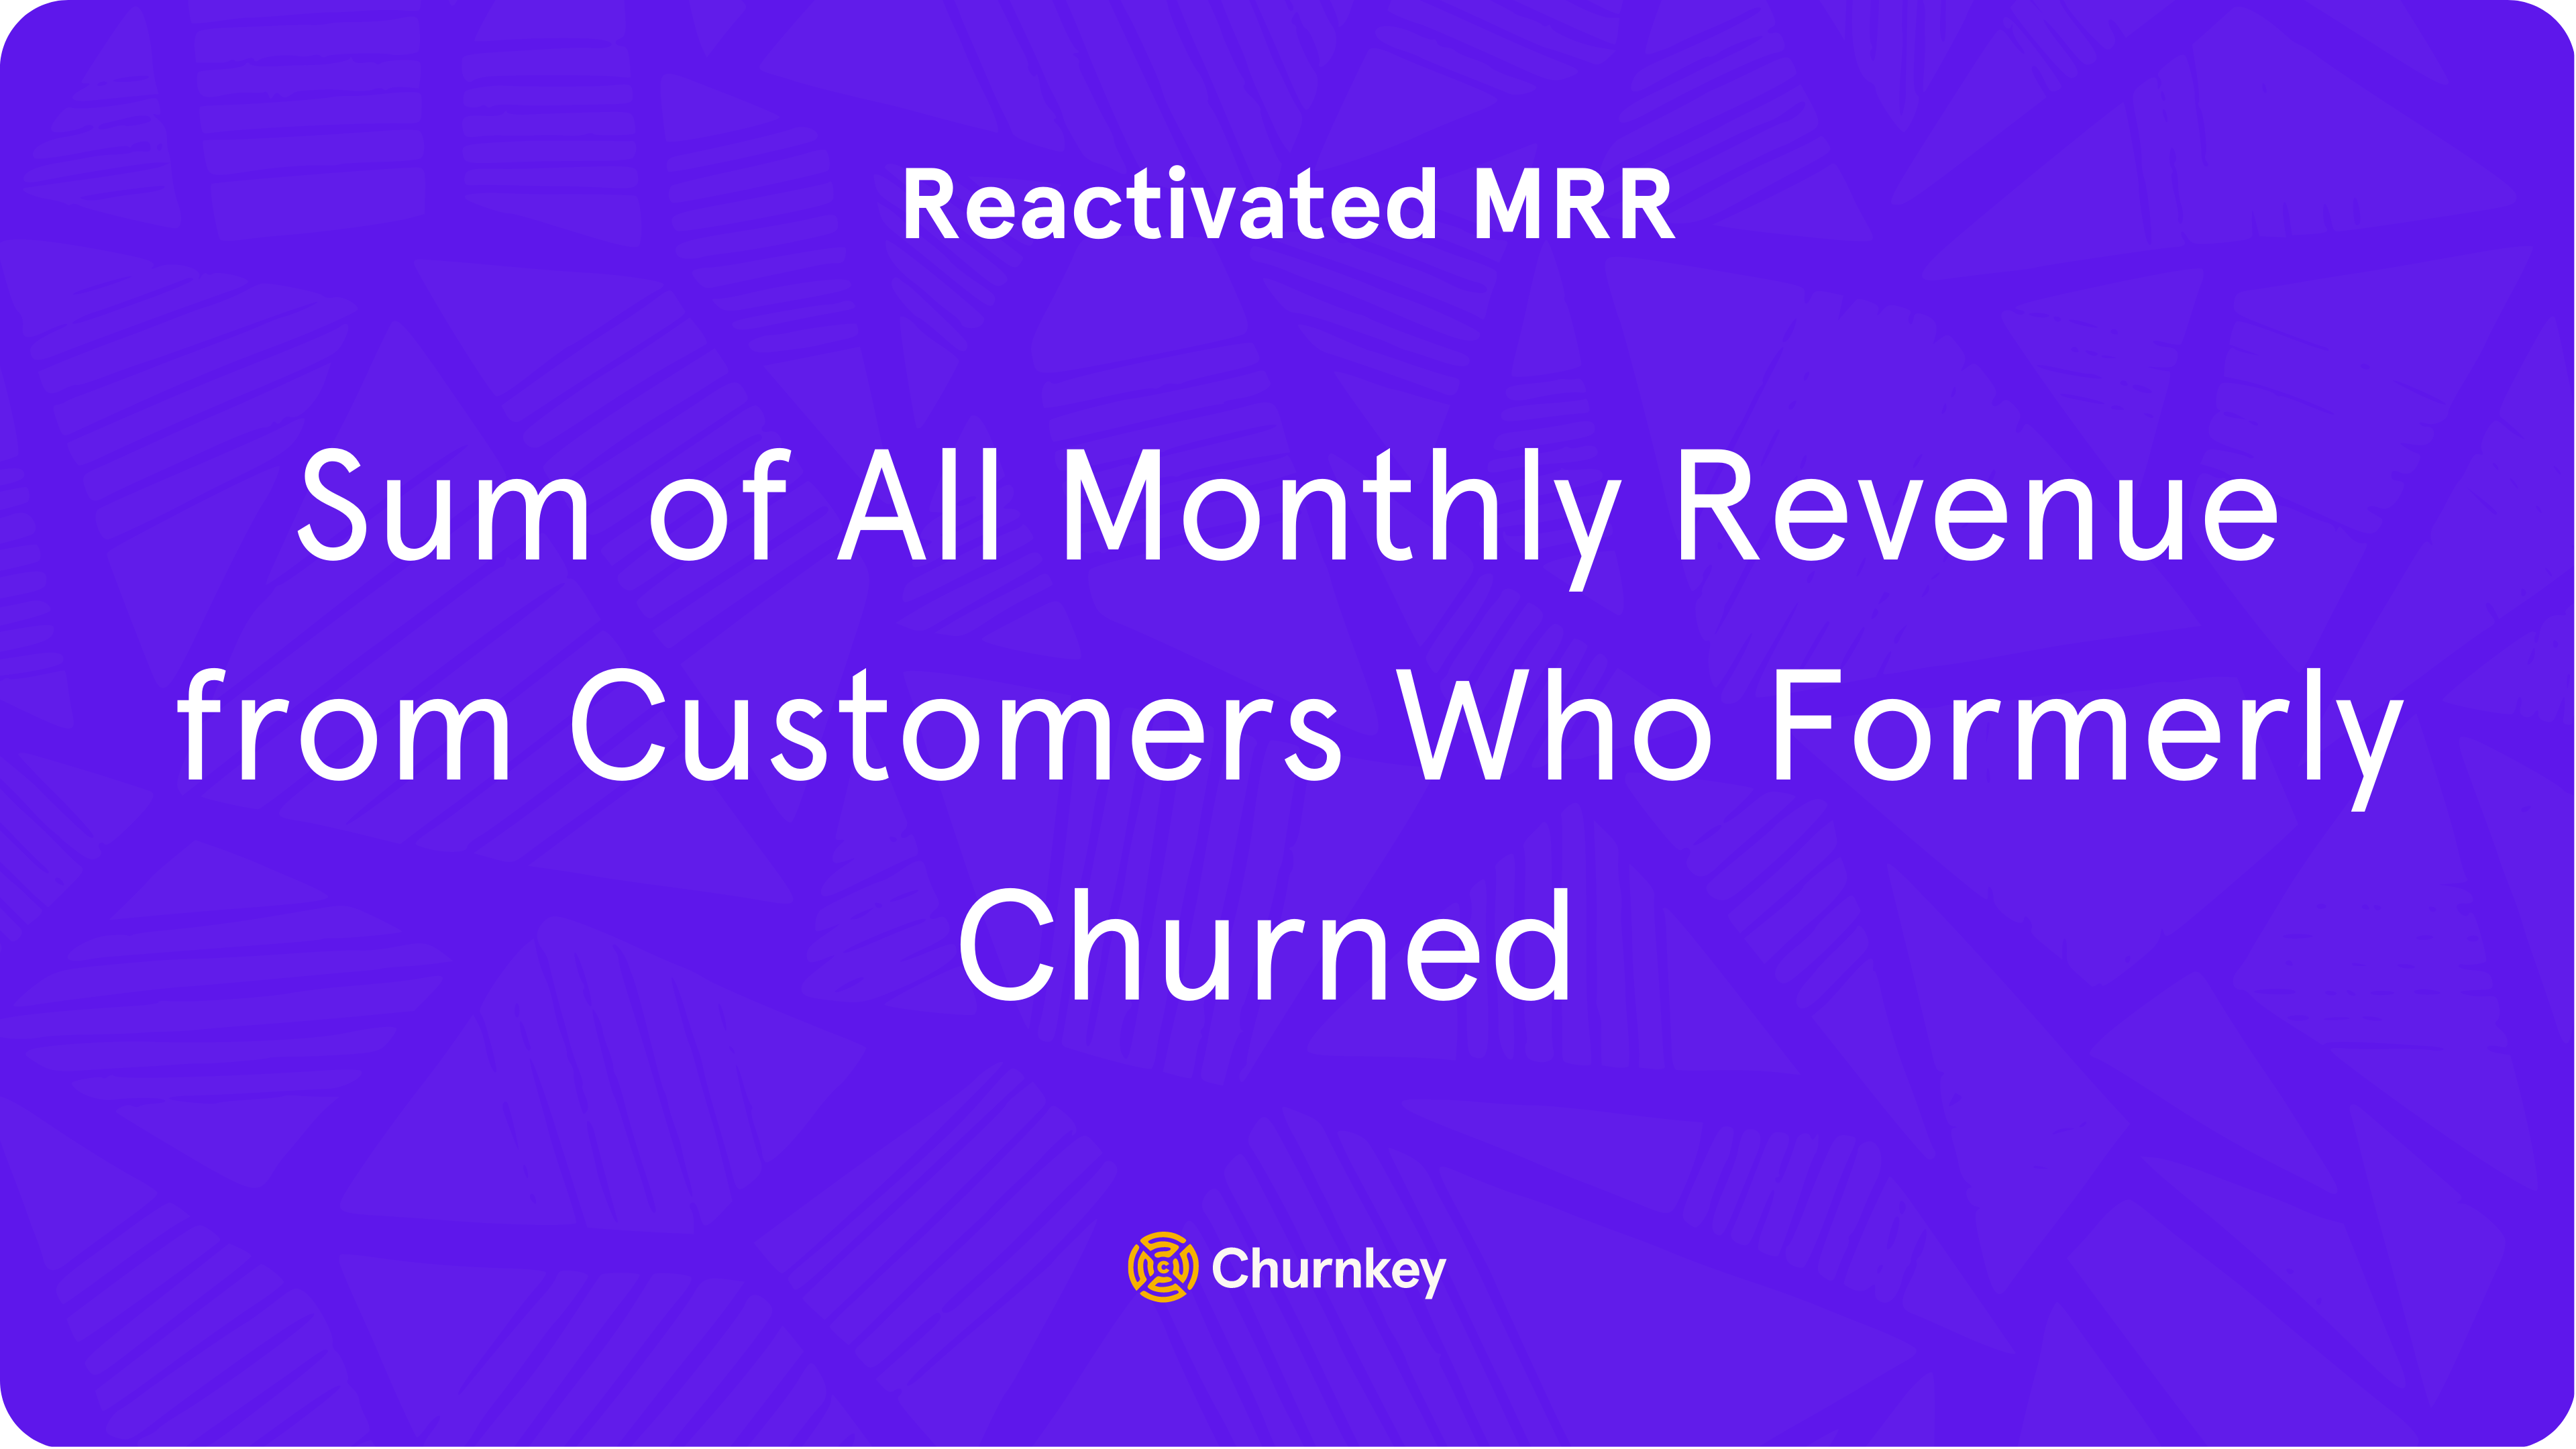 Sum of all monthly revenue from customers that formerly churned